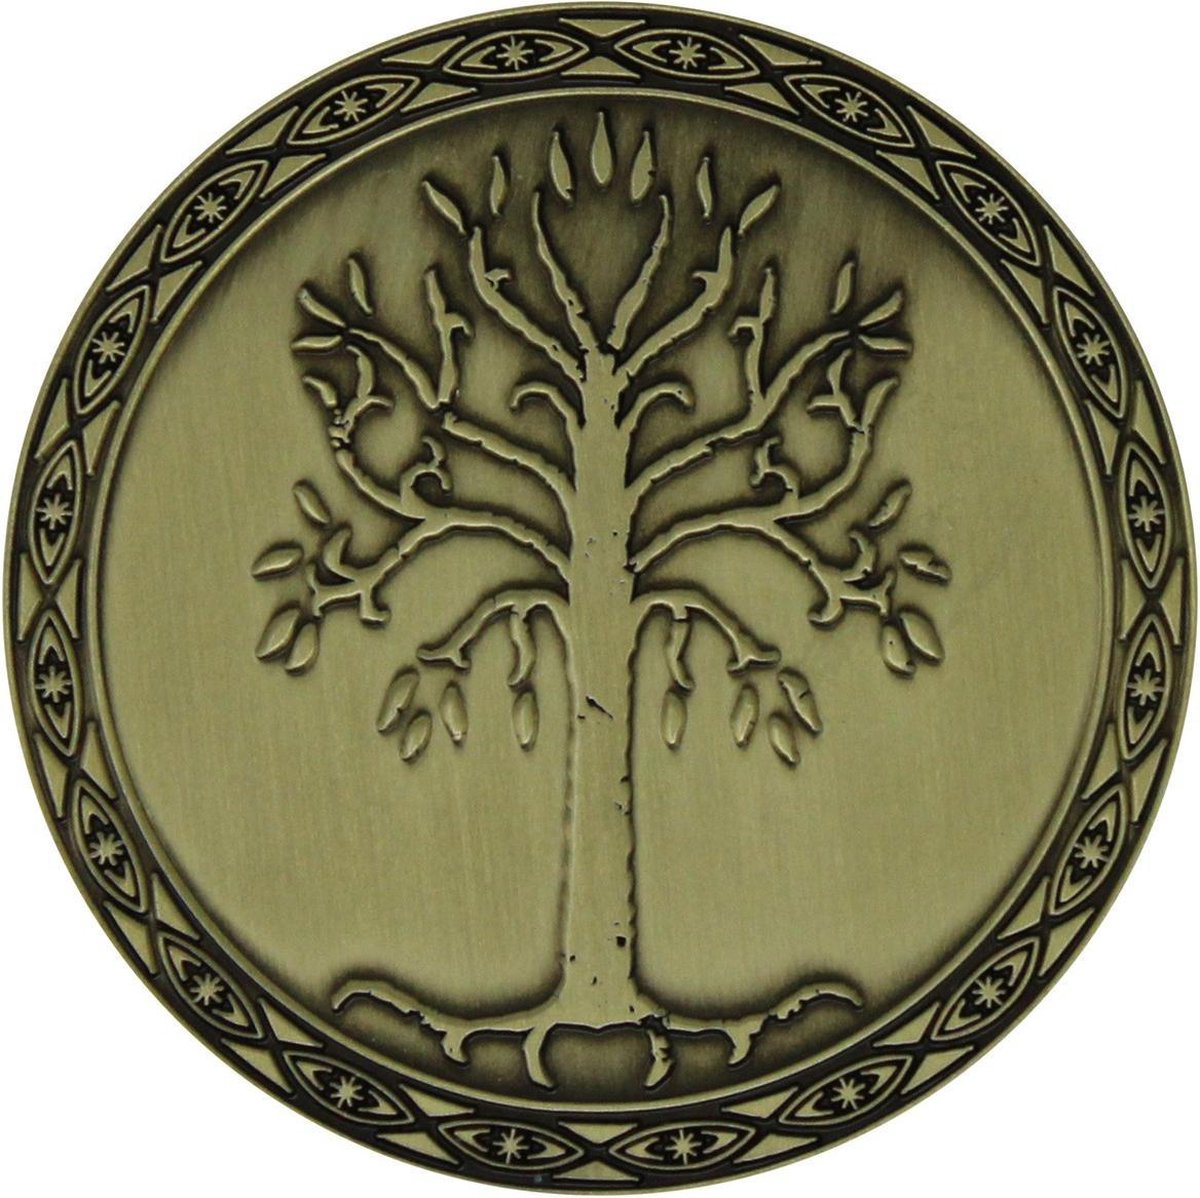 THE LORD OF THE RINGS - Gondor - Limited Edition Medallion